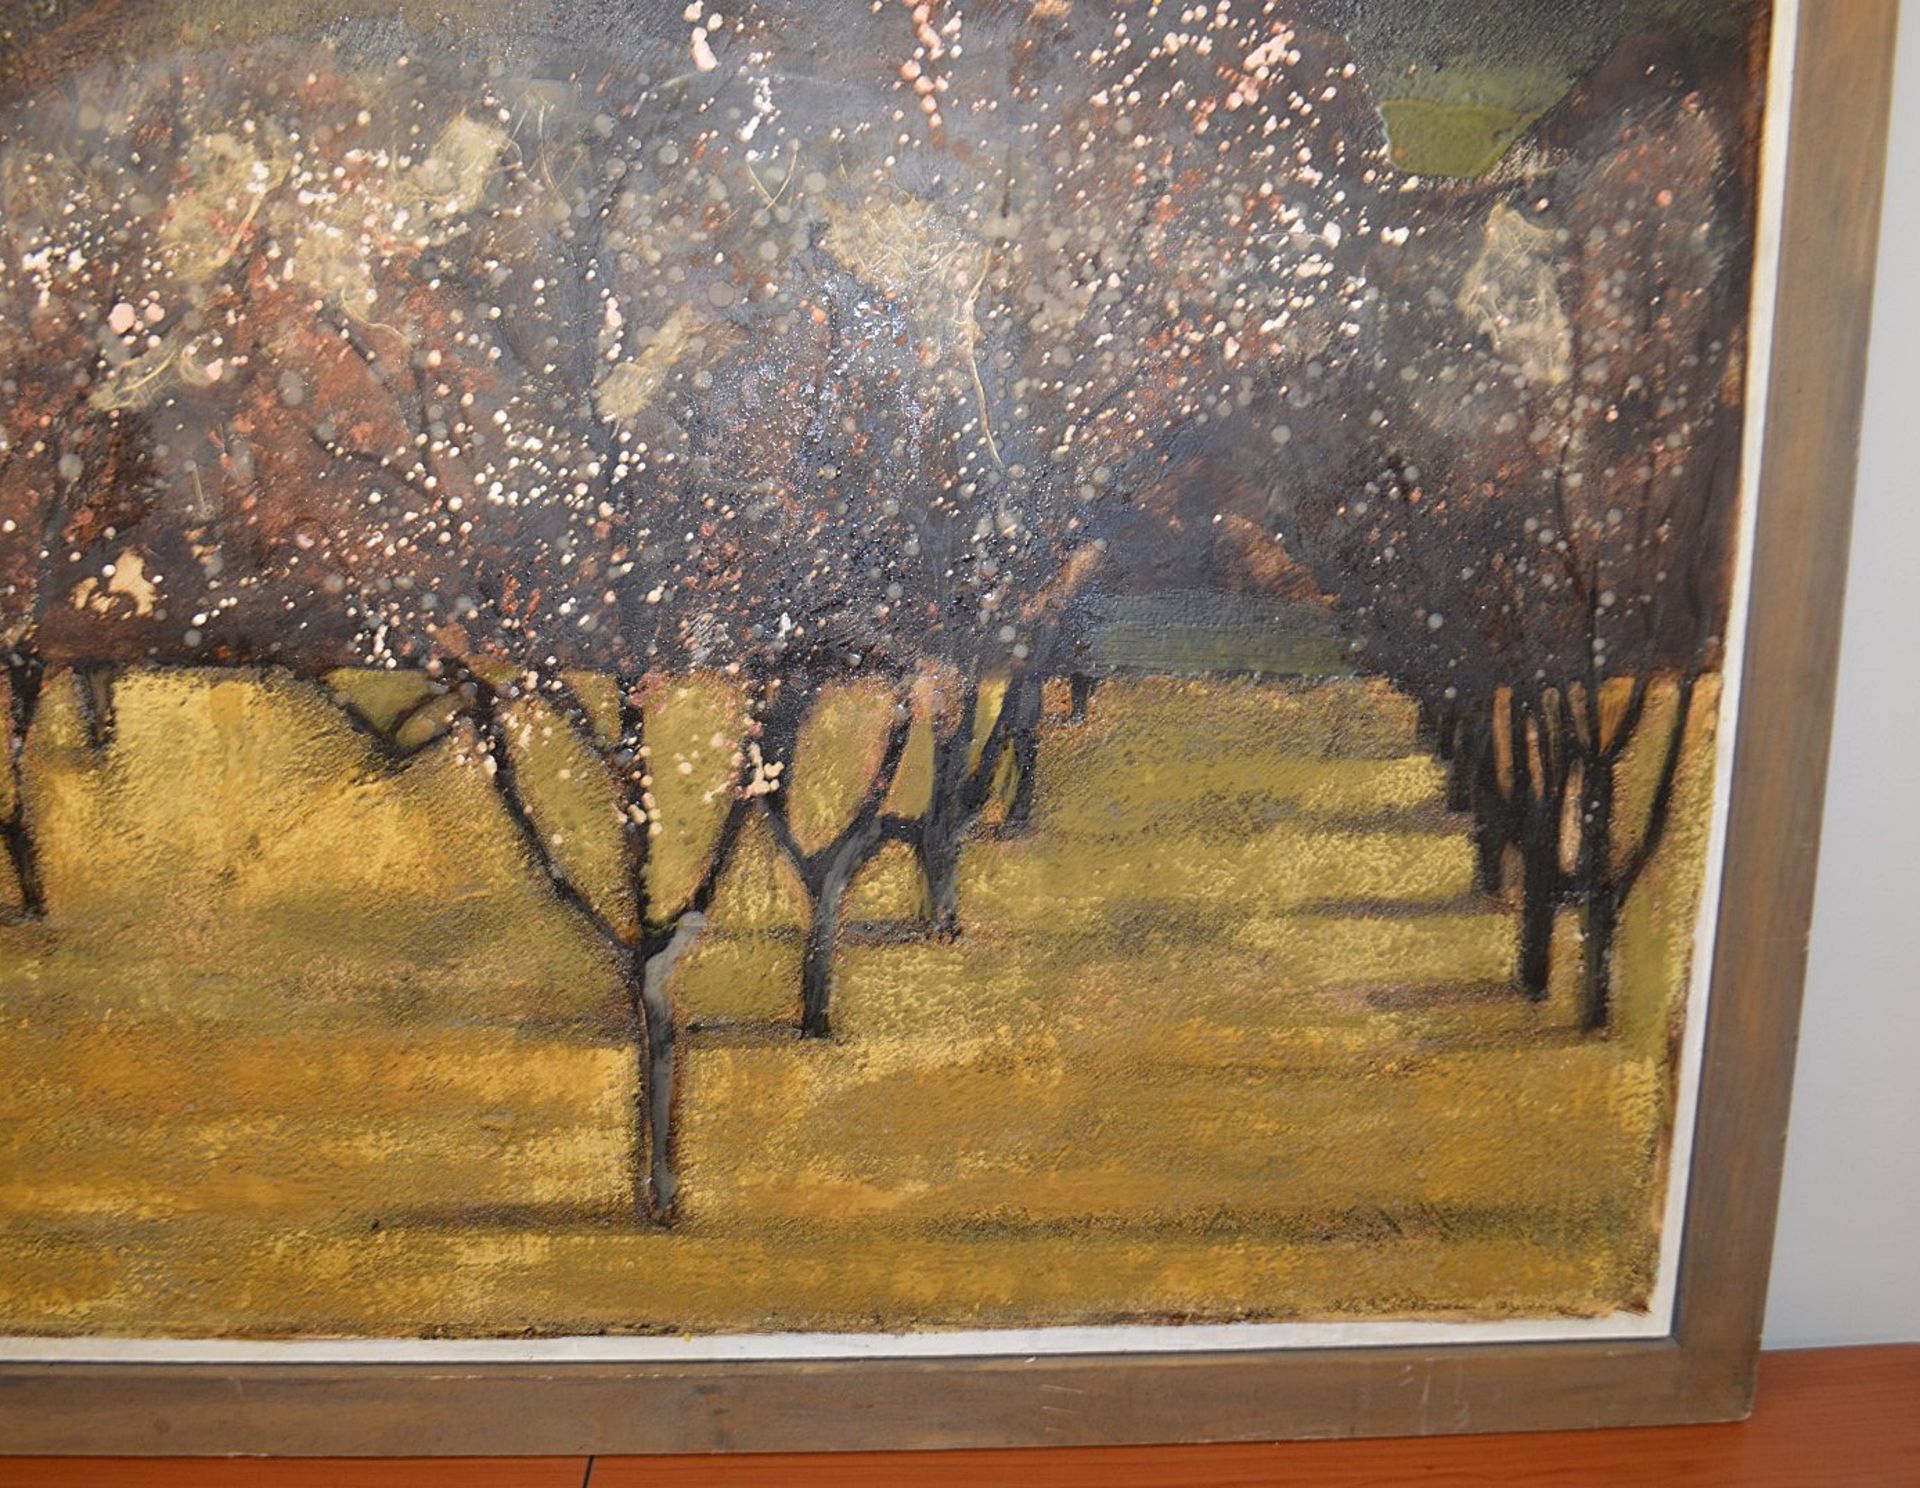 1 x Original Signed Framed Painting Of A Spanish Orchard By Lydia Bauman (1997) - Dimensions: 122 - Image 8 of 8